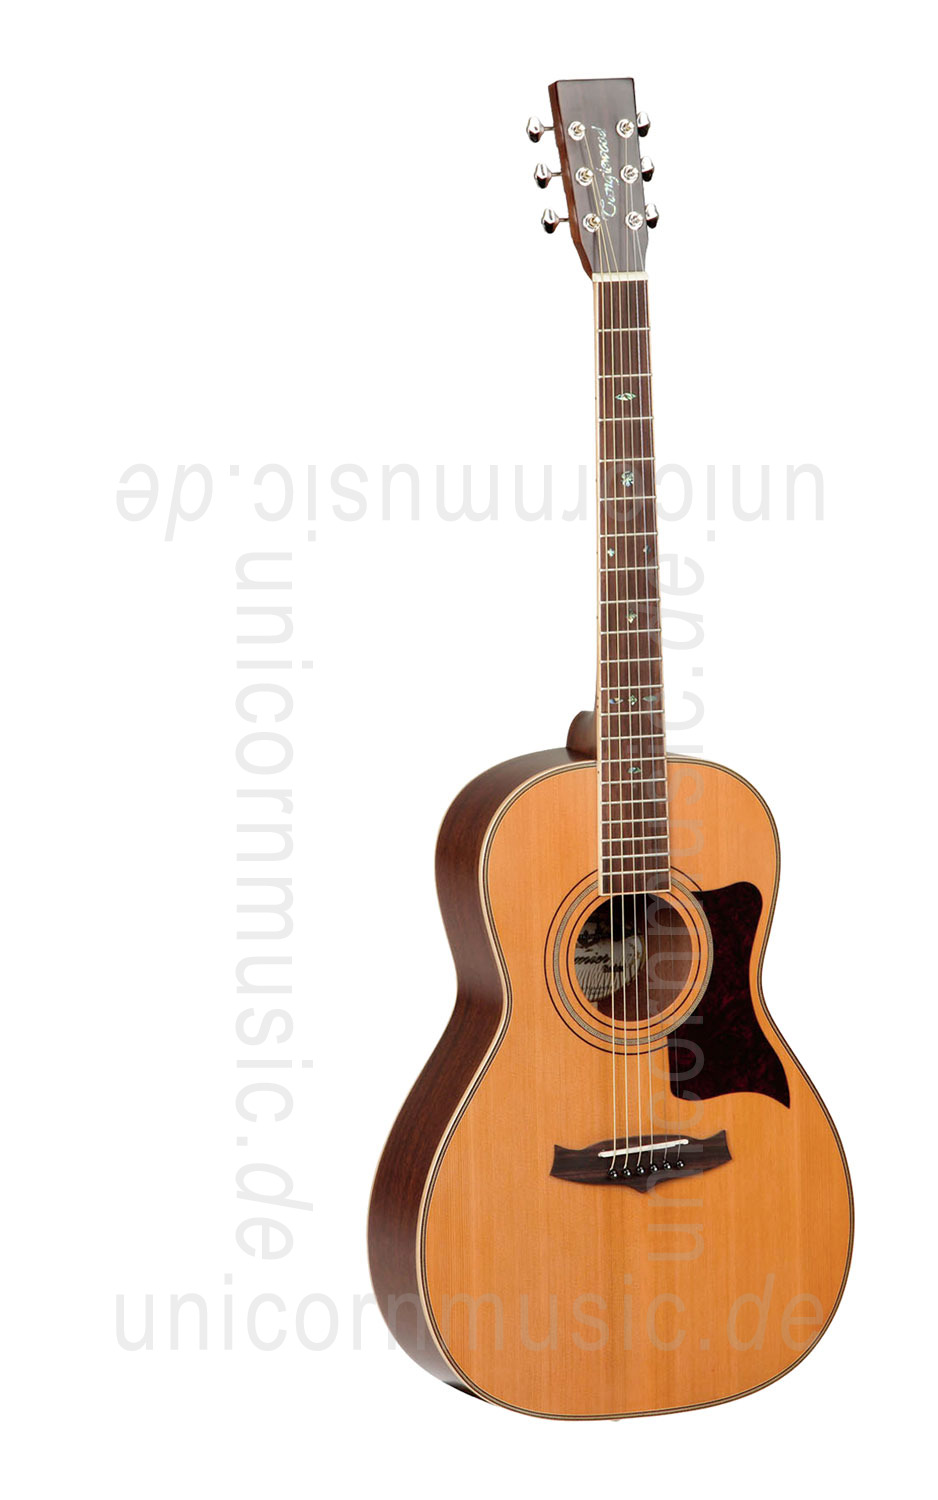 to article description / price Acoustic Guitar TANGLEWOOD TW173 - Parlour Style - Premier Series - solid top + back